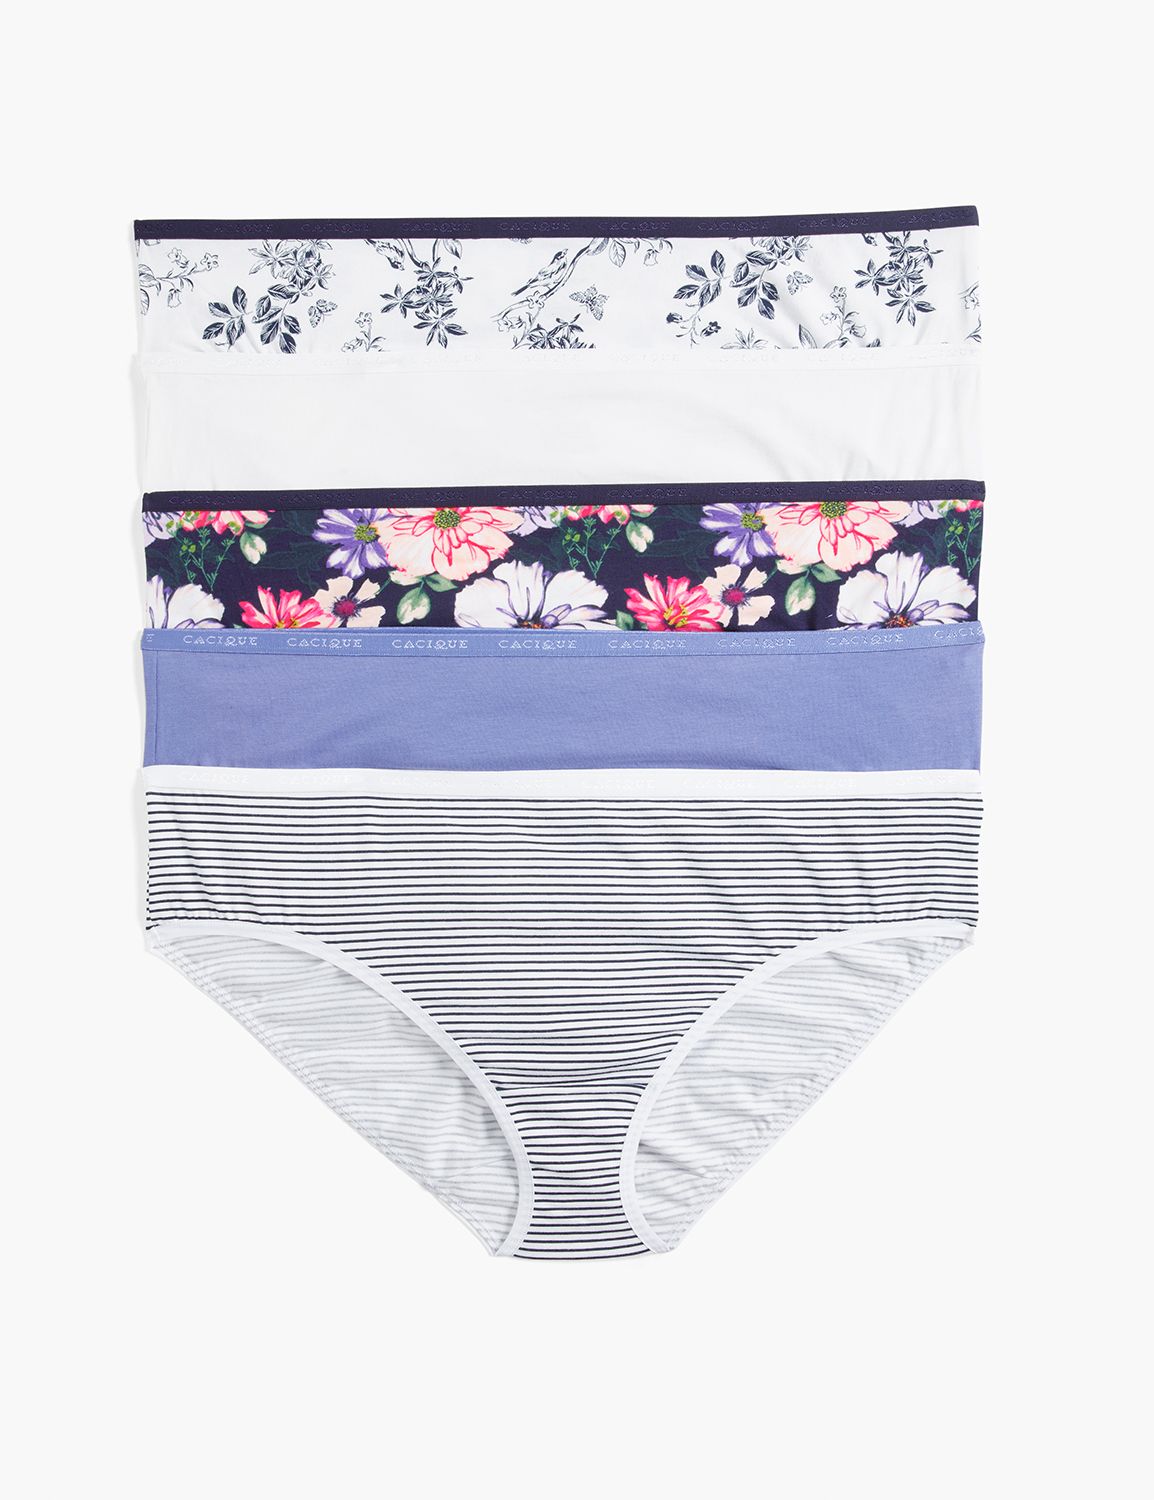 Lane Bryant - Cacique panties only 5 for $25! Ends tomorrow